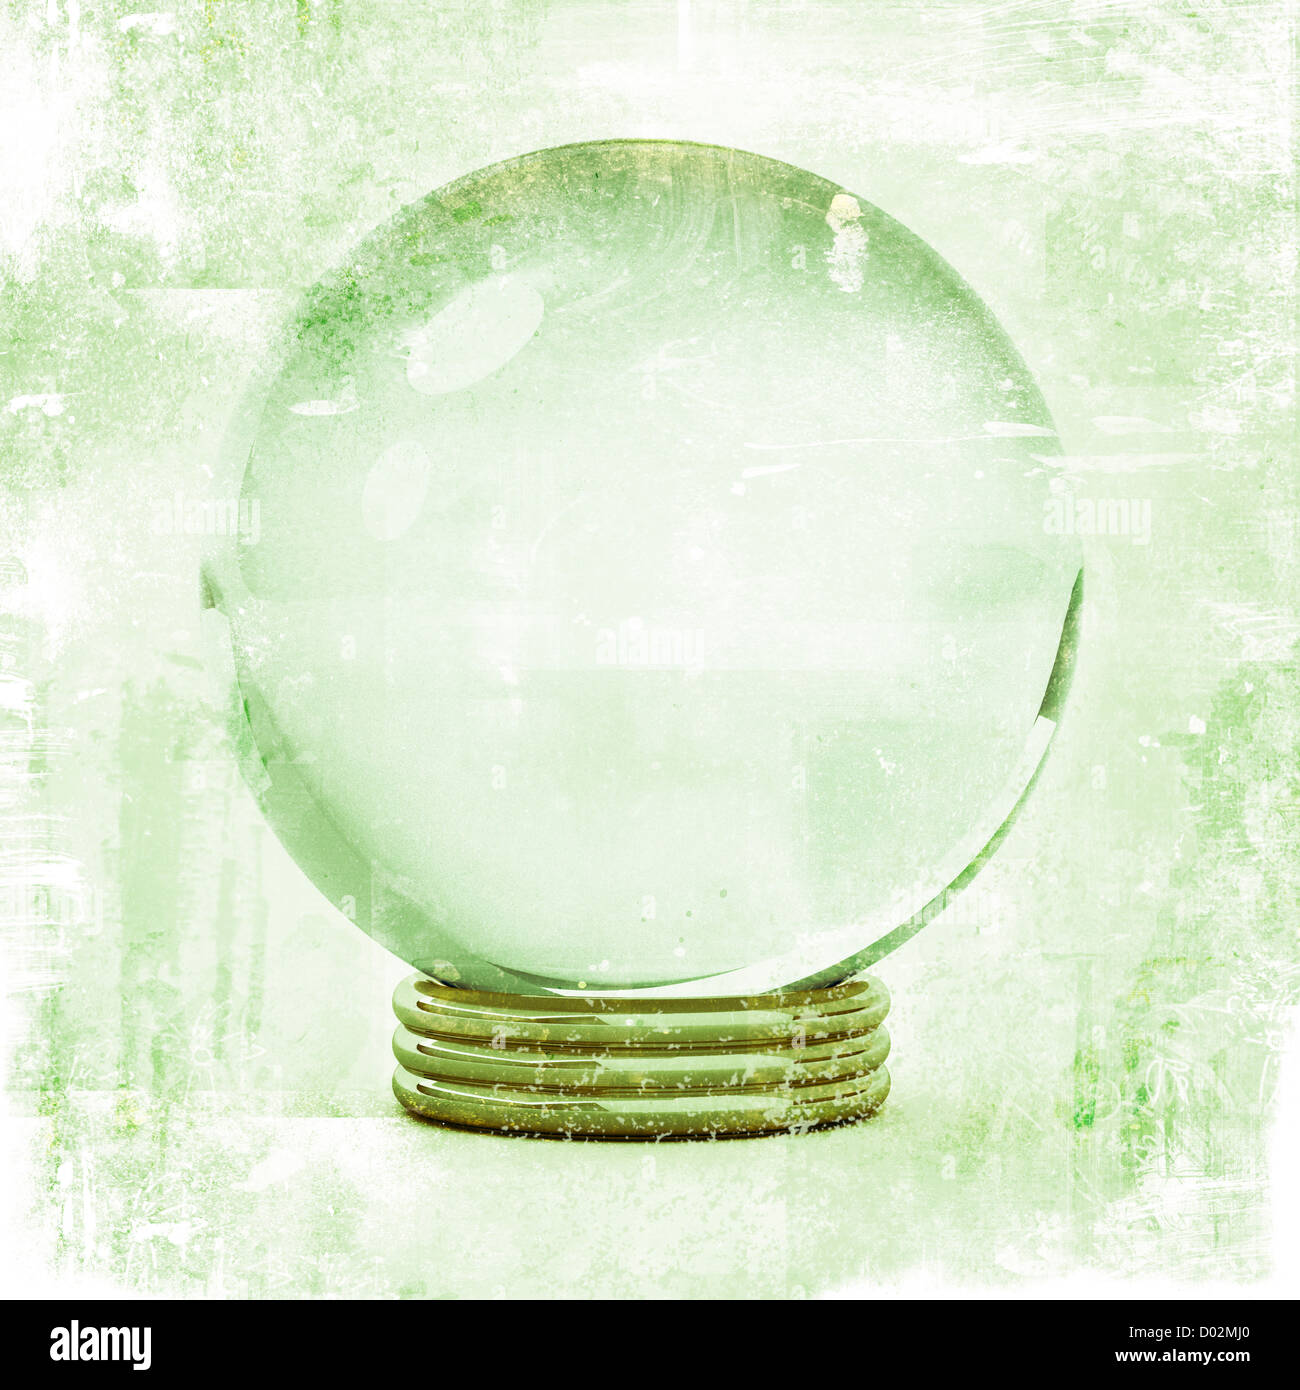 grunge illustrations of a crystal ball for future prediction. Stock Photo